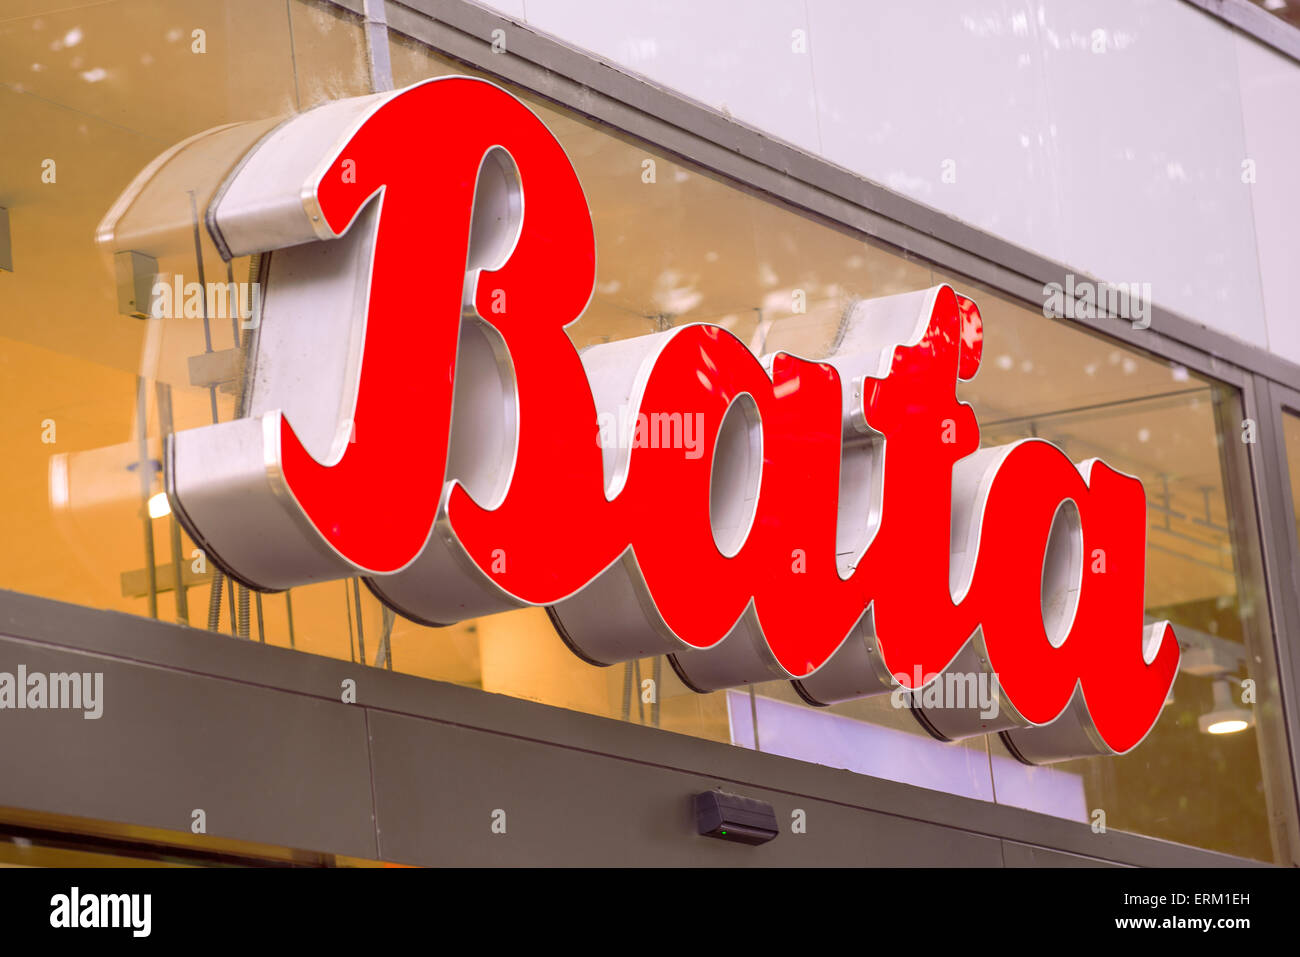 PRAGUE, CZECH REPUBLIC - MAY 25, 2015: Bata Shoe Store Logo in Prague. Bata  is present in over 70 countries worldwide and has ov Stock Photo - Alamy